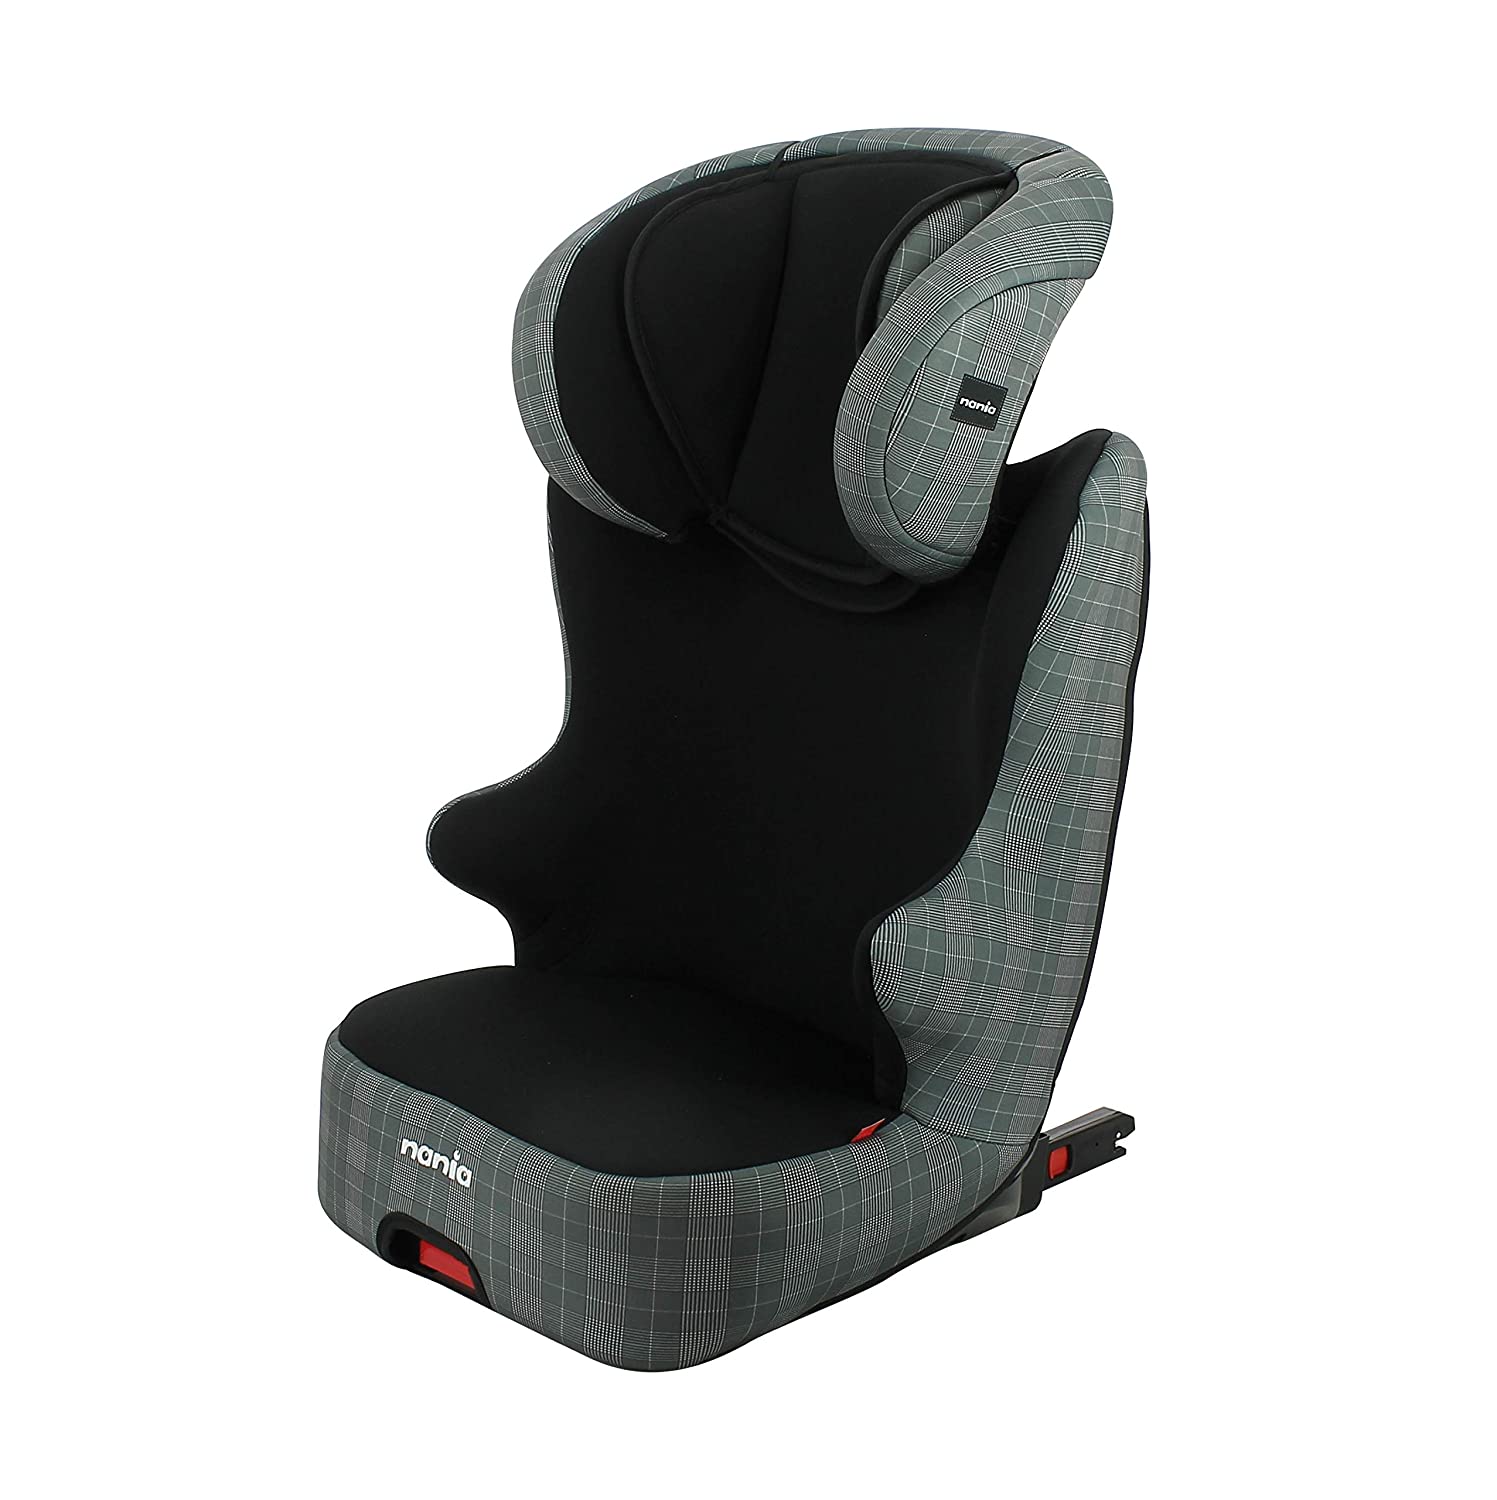 Nania Starter Easyfix Child Seat with Side Protection, Adjustable Headrest, Group 2/3, 15-36 kg